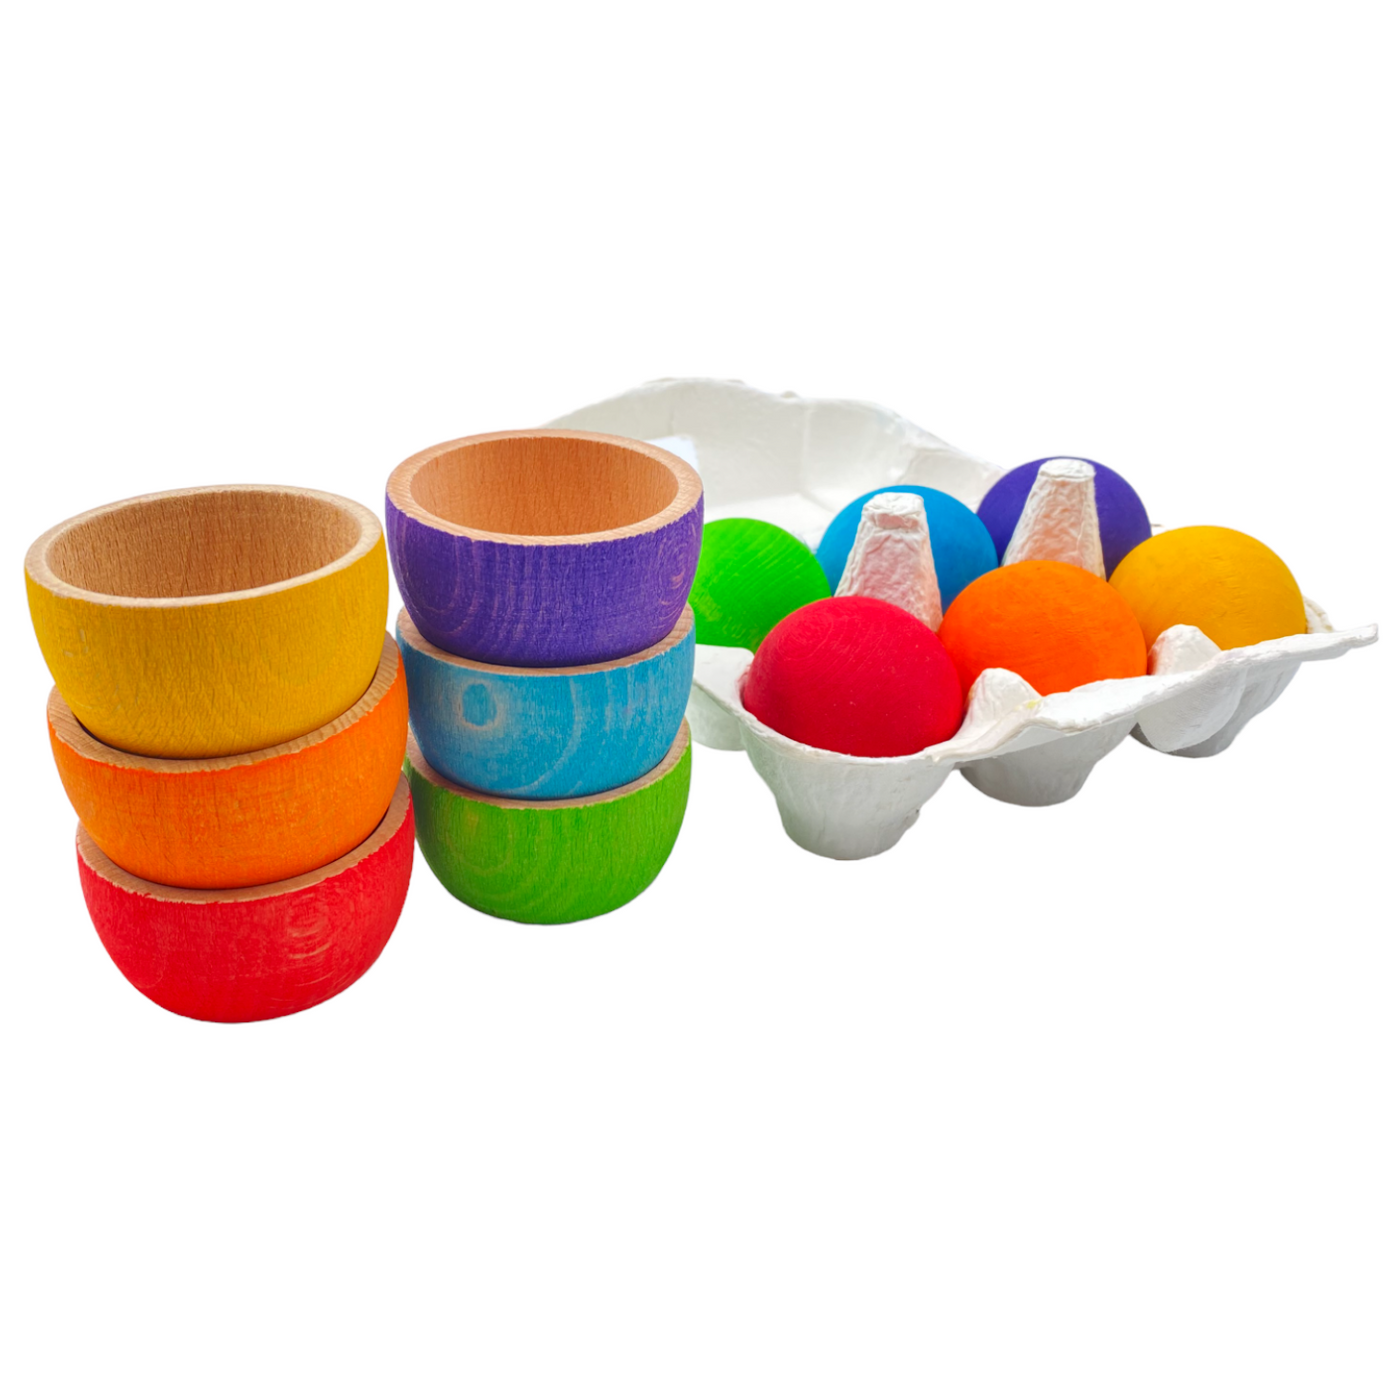 6 Colorful Wooden Balls – Woodberry